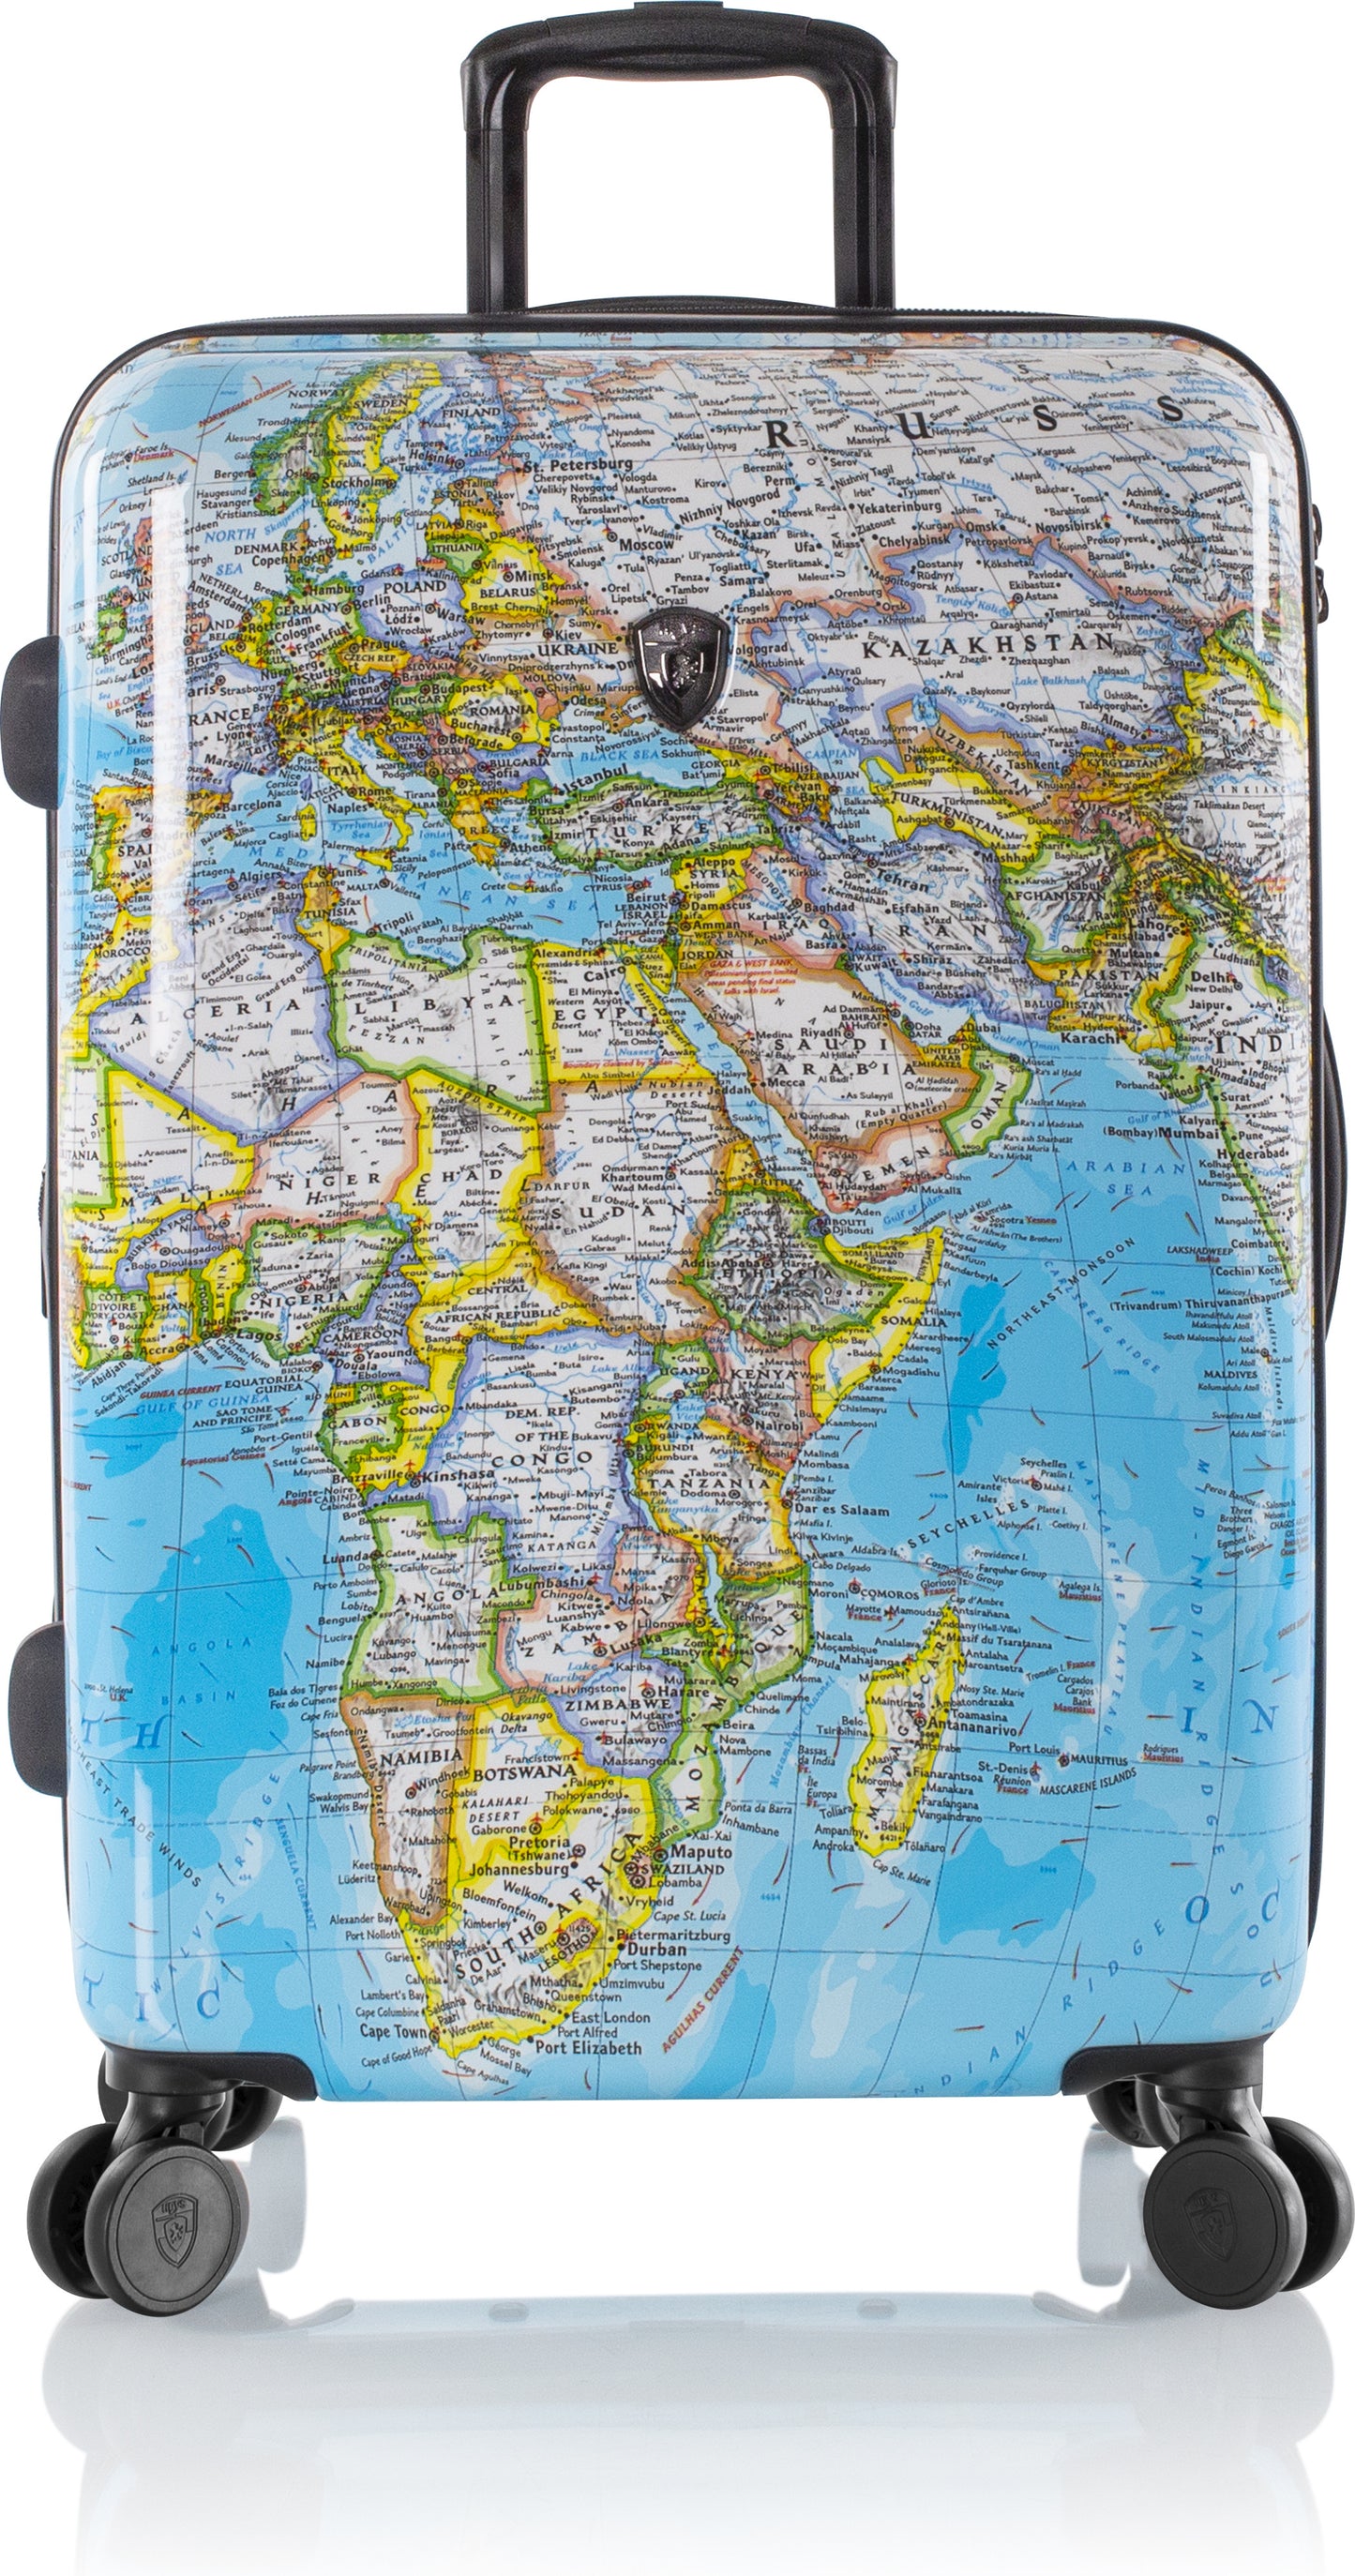 Heys Journey 3G Fashion Spinner 66 cm Suitcase, Colorful Map